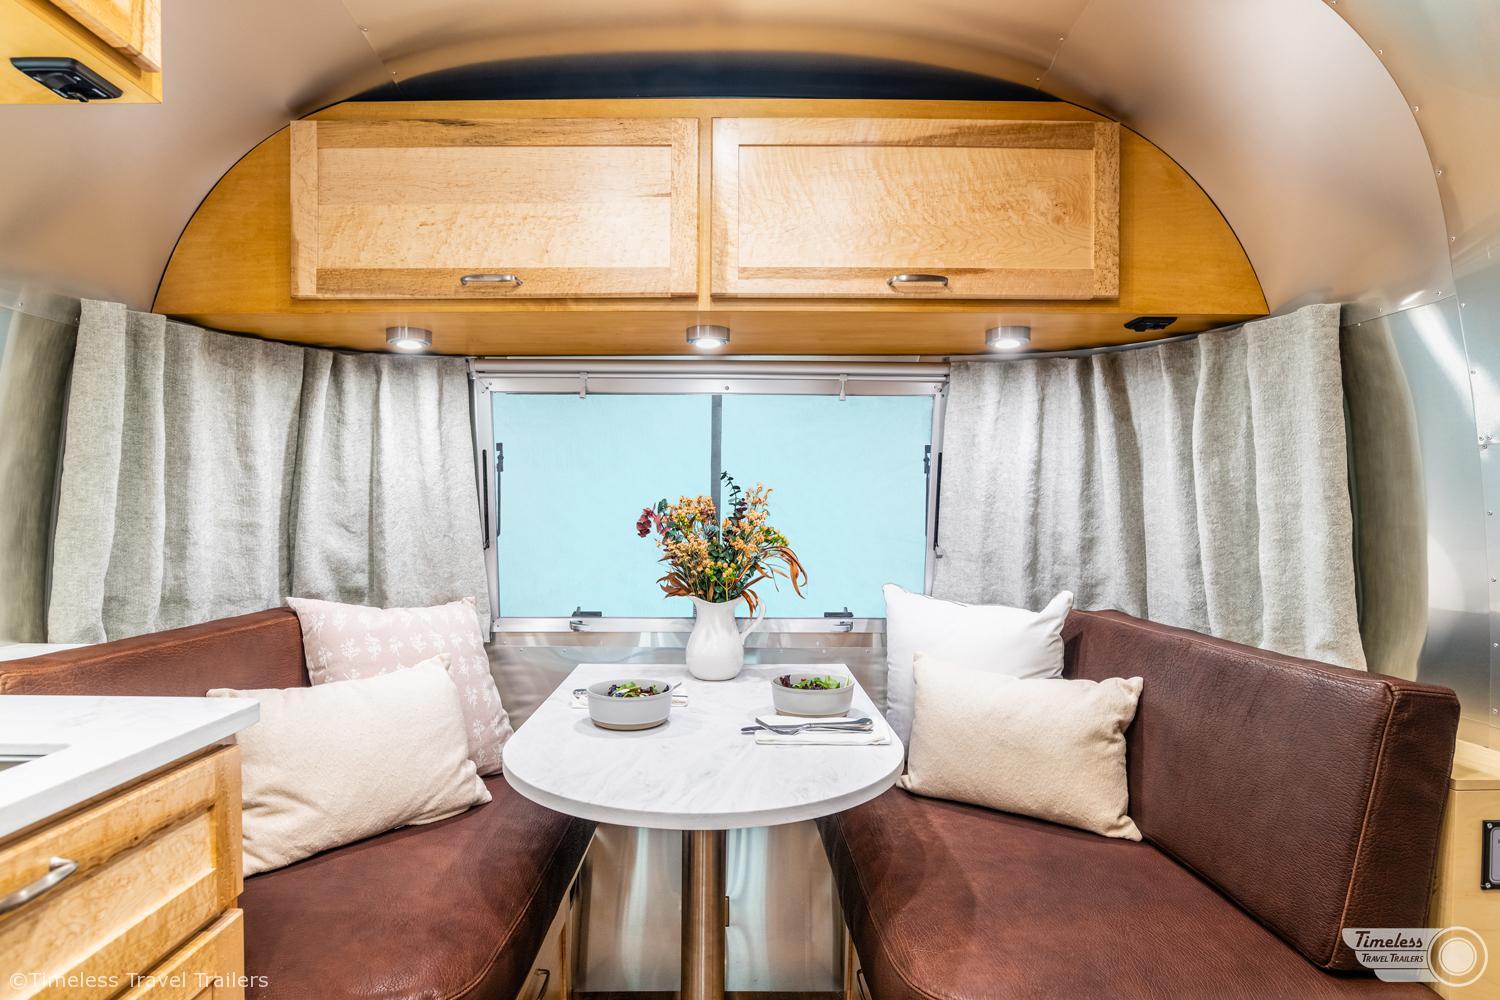 Timeless Travel Trailers - Airstream's most experienced authorized